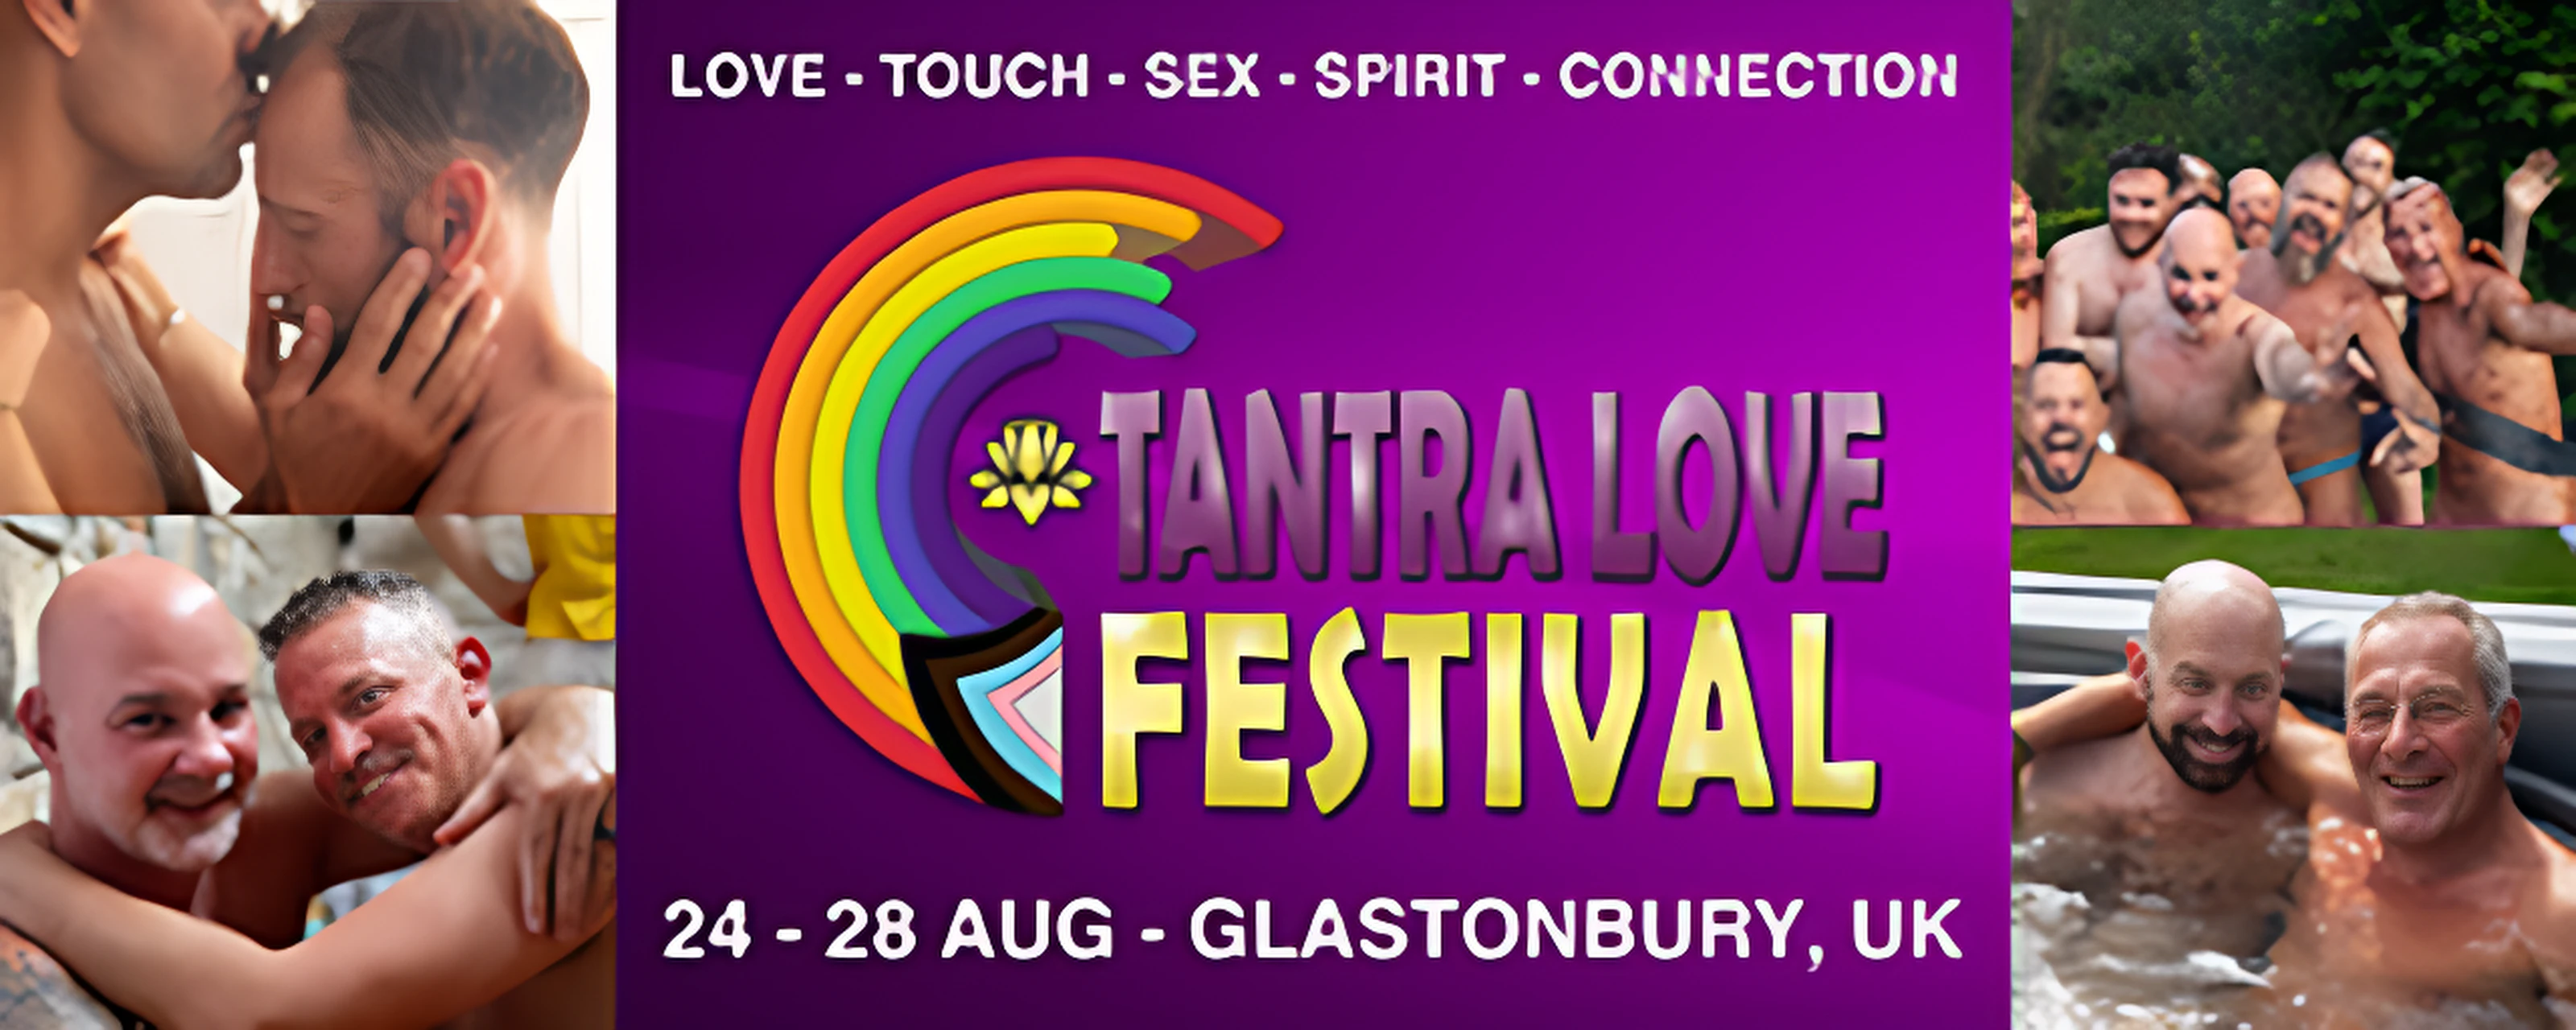 Tantra-Liebesfestival